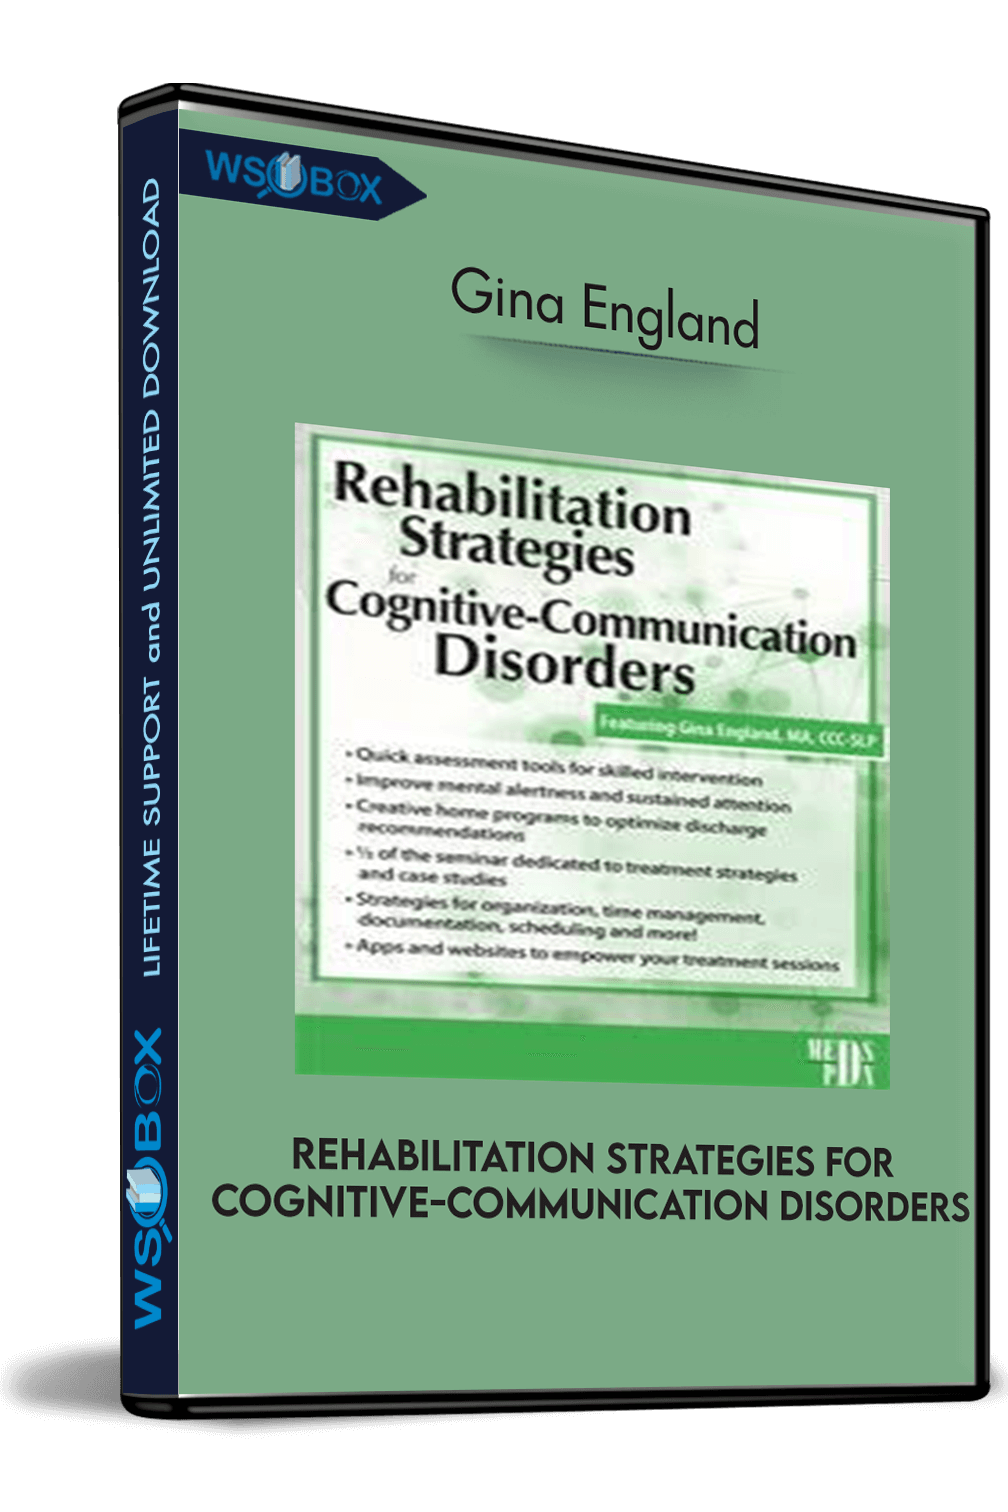 rehabilitation-strategies-for-cognitive-communication-disorders-gina-england